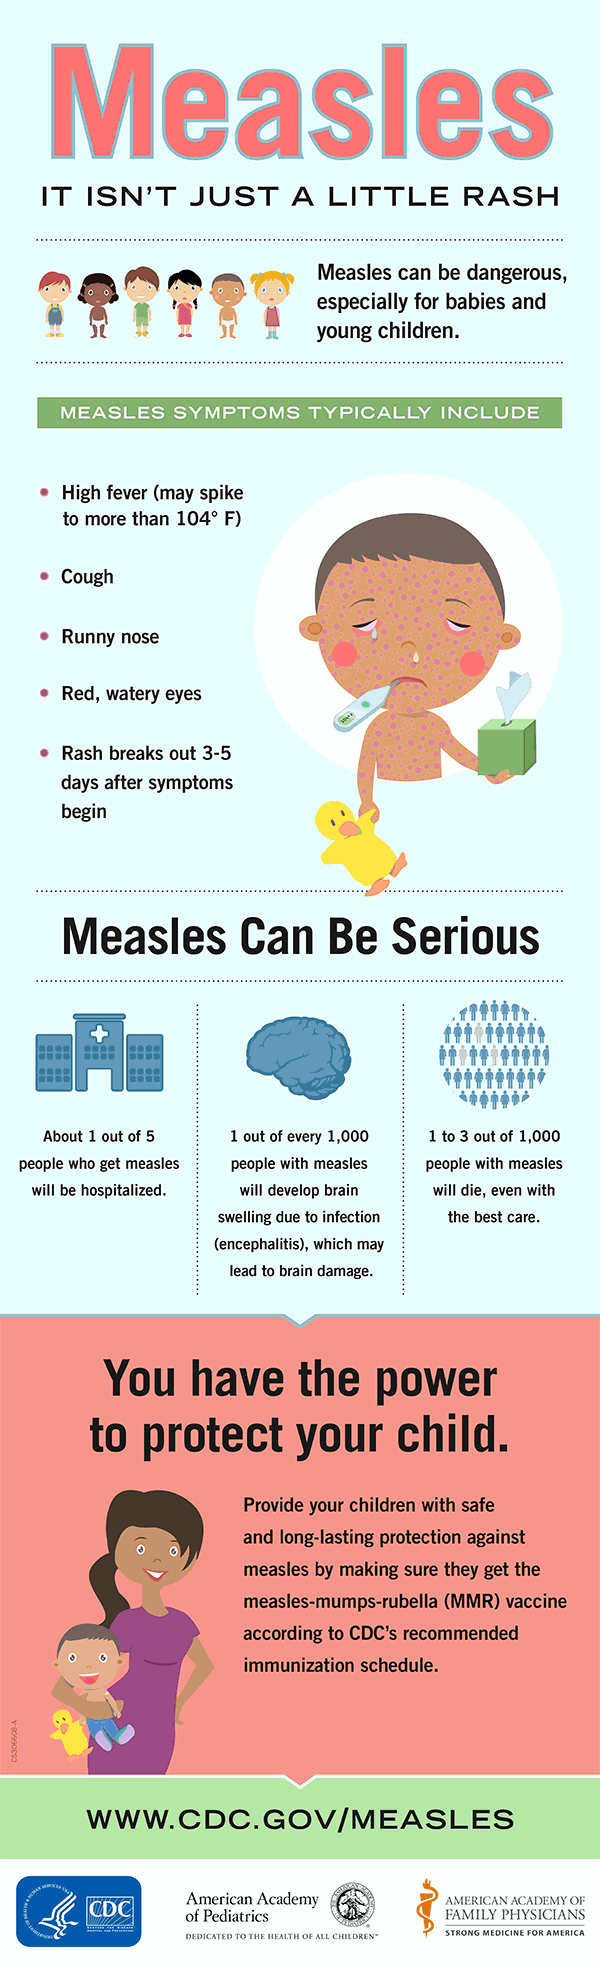 Infographic. Measles: it isn’t just a little rash. Measles can be dangerous, especially for babies and young children. Measles symptoms typically include high fever (may spike to more than 104 degrees F), cough, runny nose, red watery eyes; rash breaks out 3-6 days after symptoms begin. Measles can be serious. About 1 out of 4 people who get measles will be hospitalized. 1 out of every 1,000 people with measles will develop brain swelling (encephalitis), which may lead to brain damage. 1 or 2 out of 1,000 people with measles will die, even with the best care. You have the power to protect your child. Provide your children with safe and long-lasting protection agains measles by making sure they get the measles-mumps-rubella (MMR) vaccine according to CDC’s recommended immunization schedule.